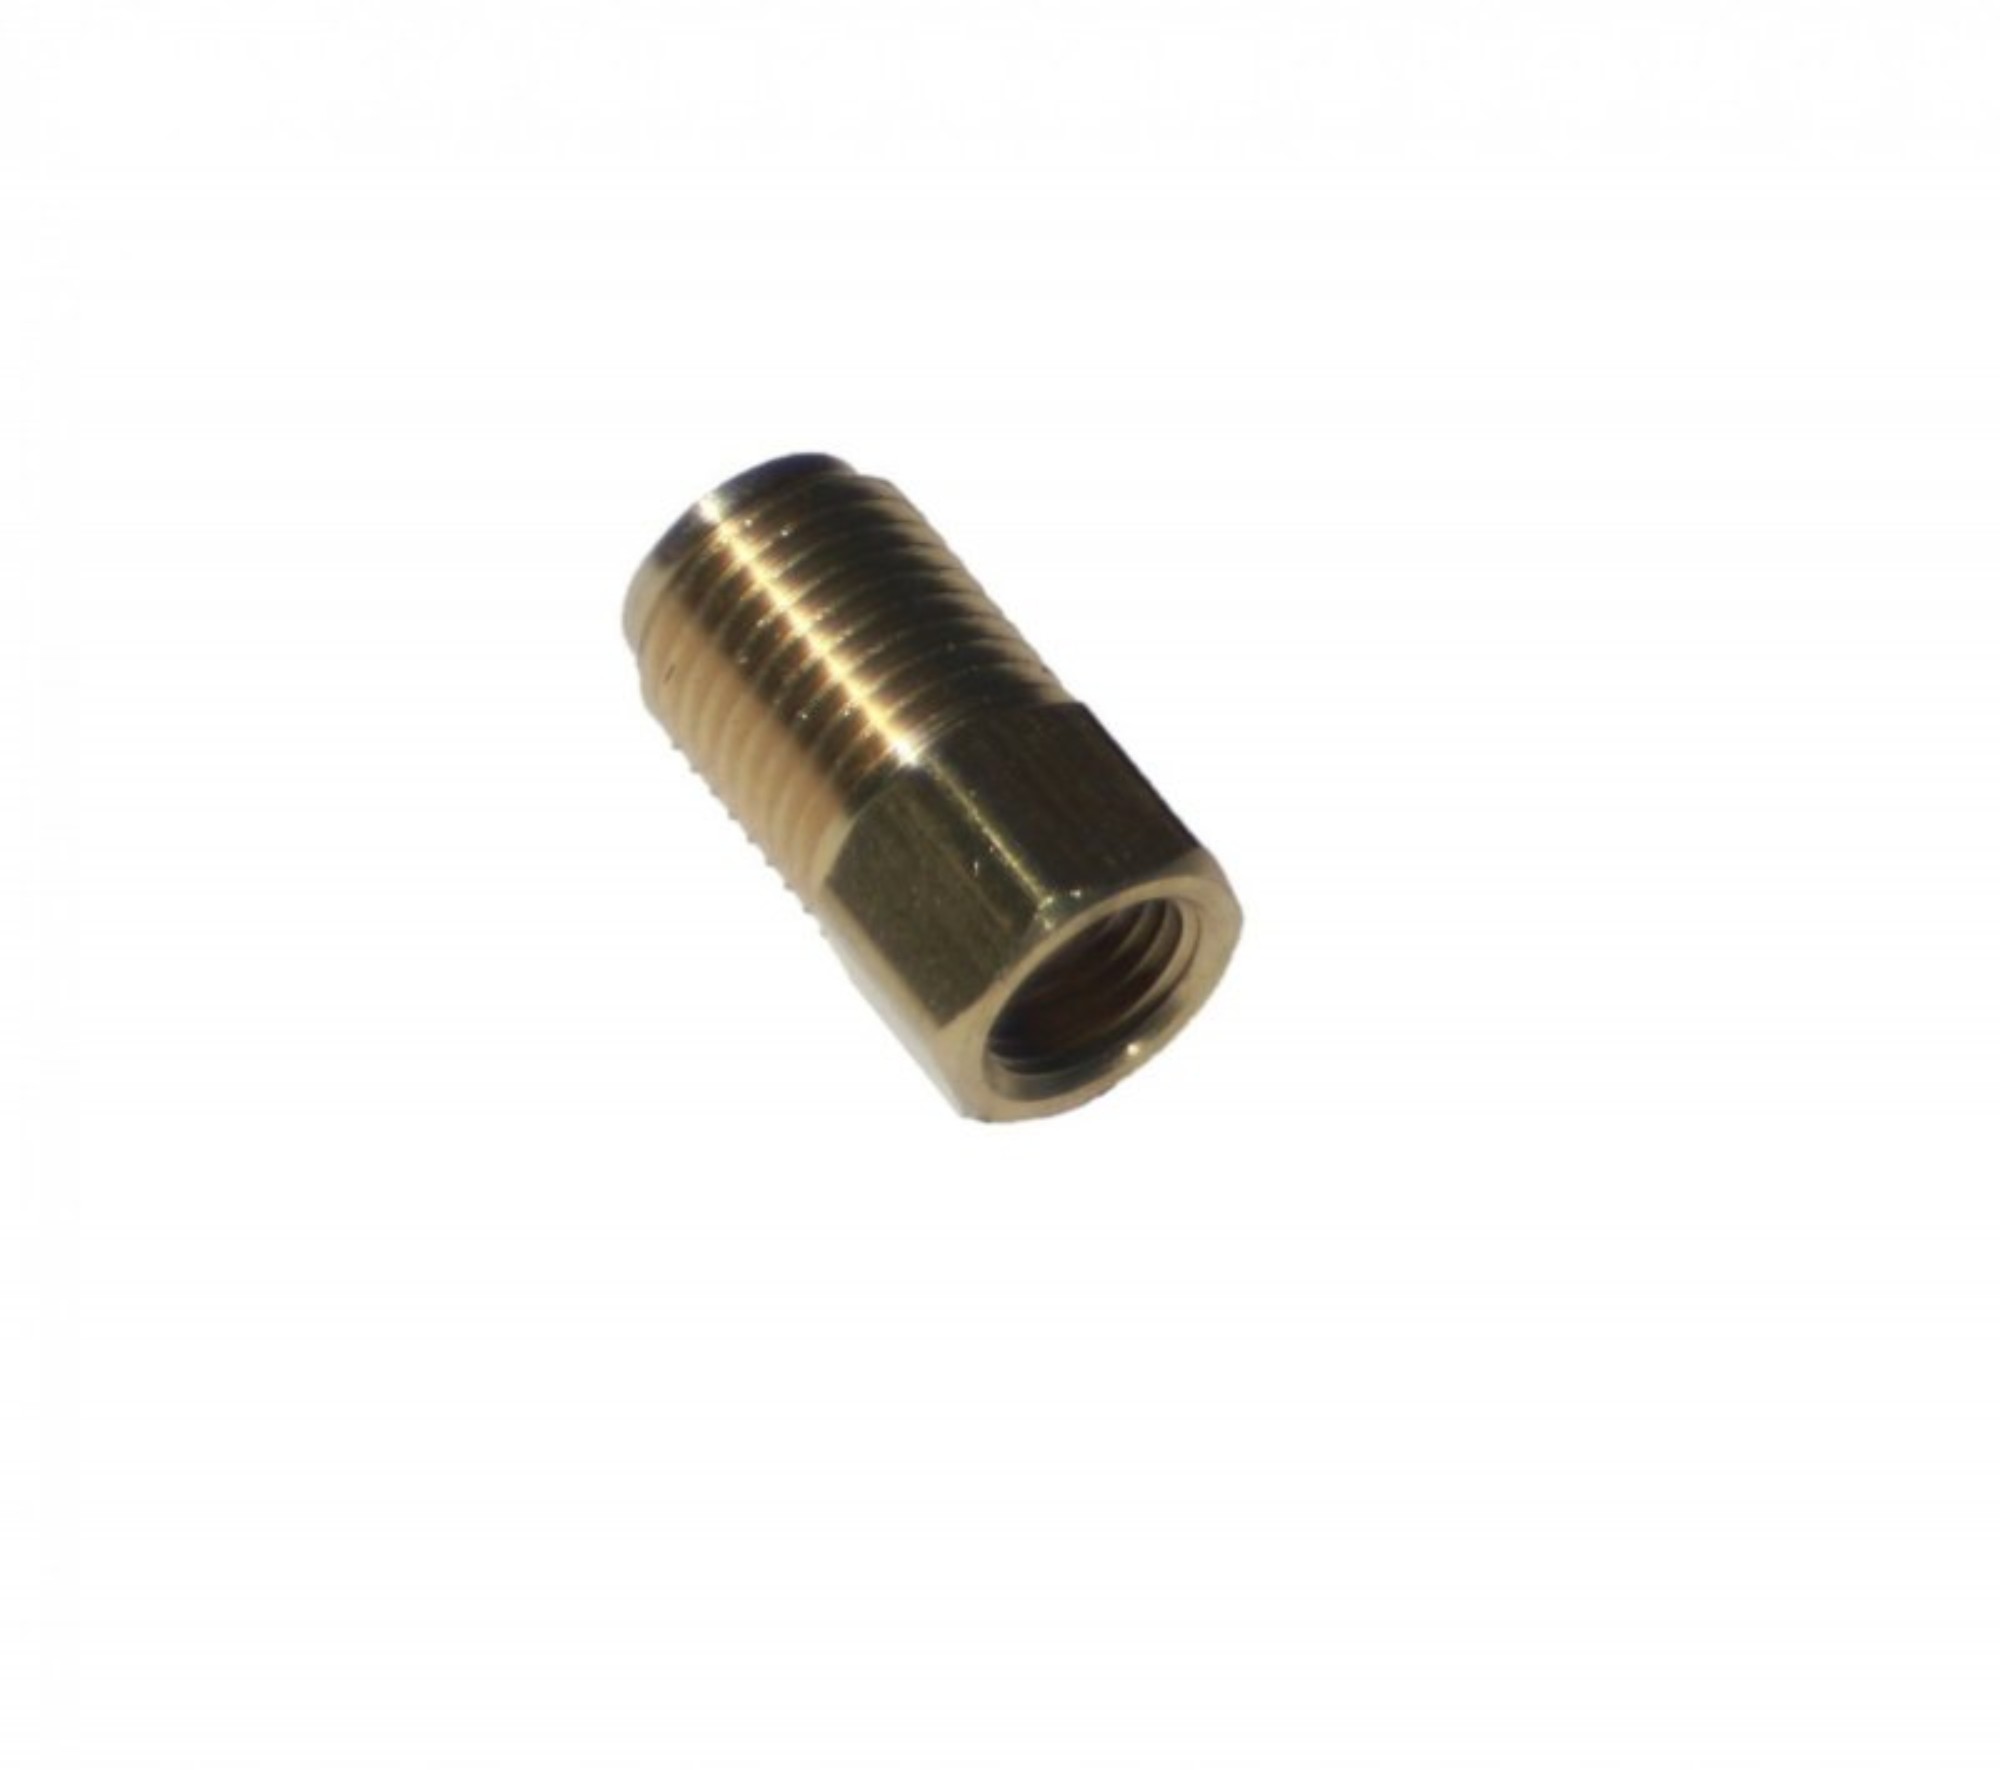 Fitting Adapter 1/2-20 Male to 3/8-24 Female - FT7909